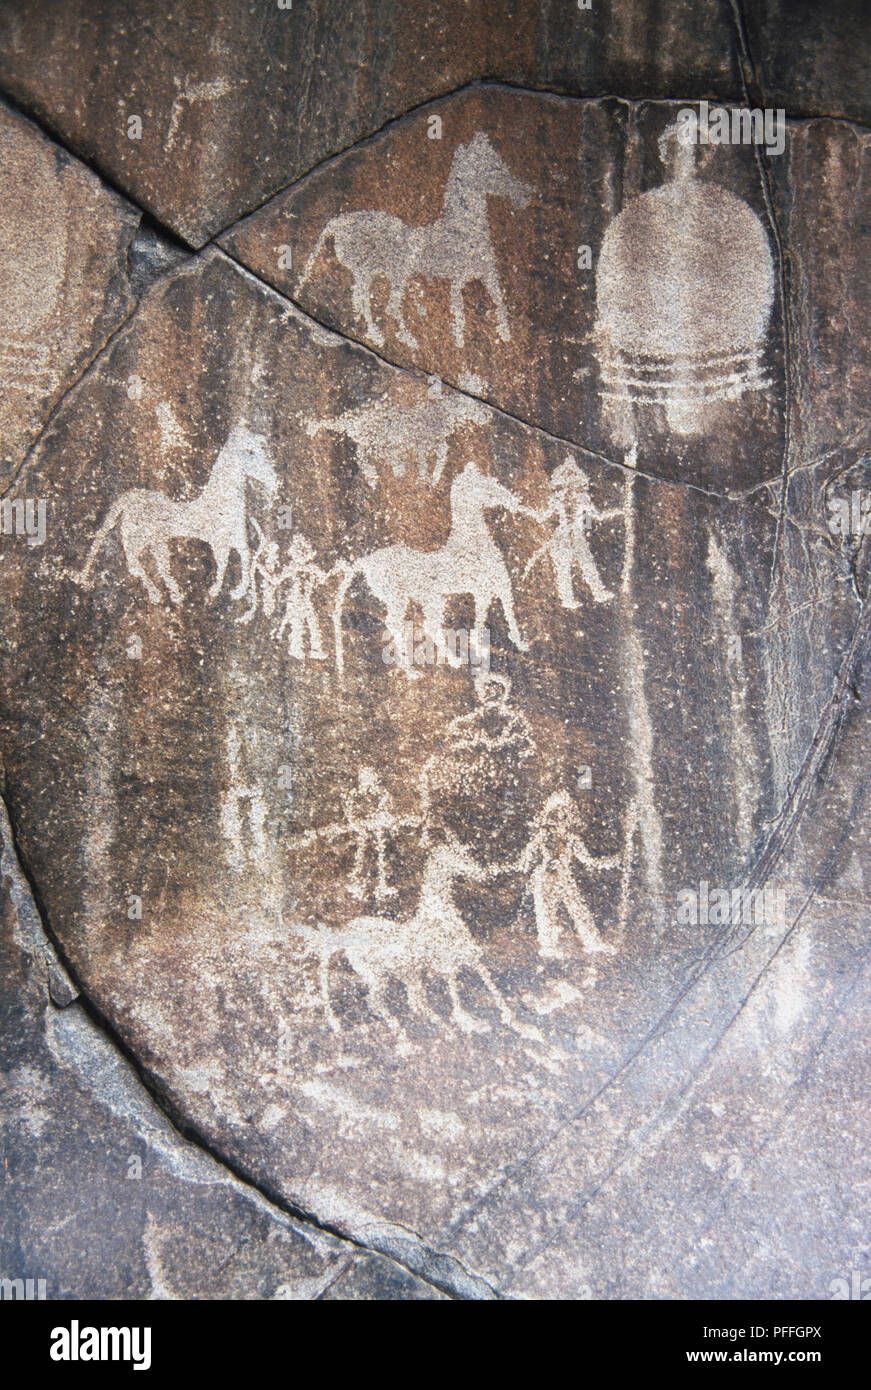 images-of-animals-and-symbols-are-amongst-the-30000-rock-carvings-near-the-village-of-chilas-in-the-karakoram-mountain-range-of-northern-pakistan-PFFGPX.jpg